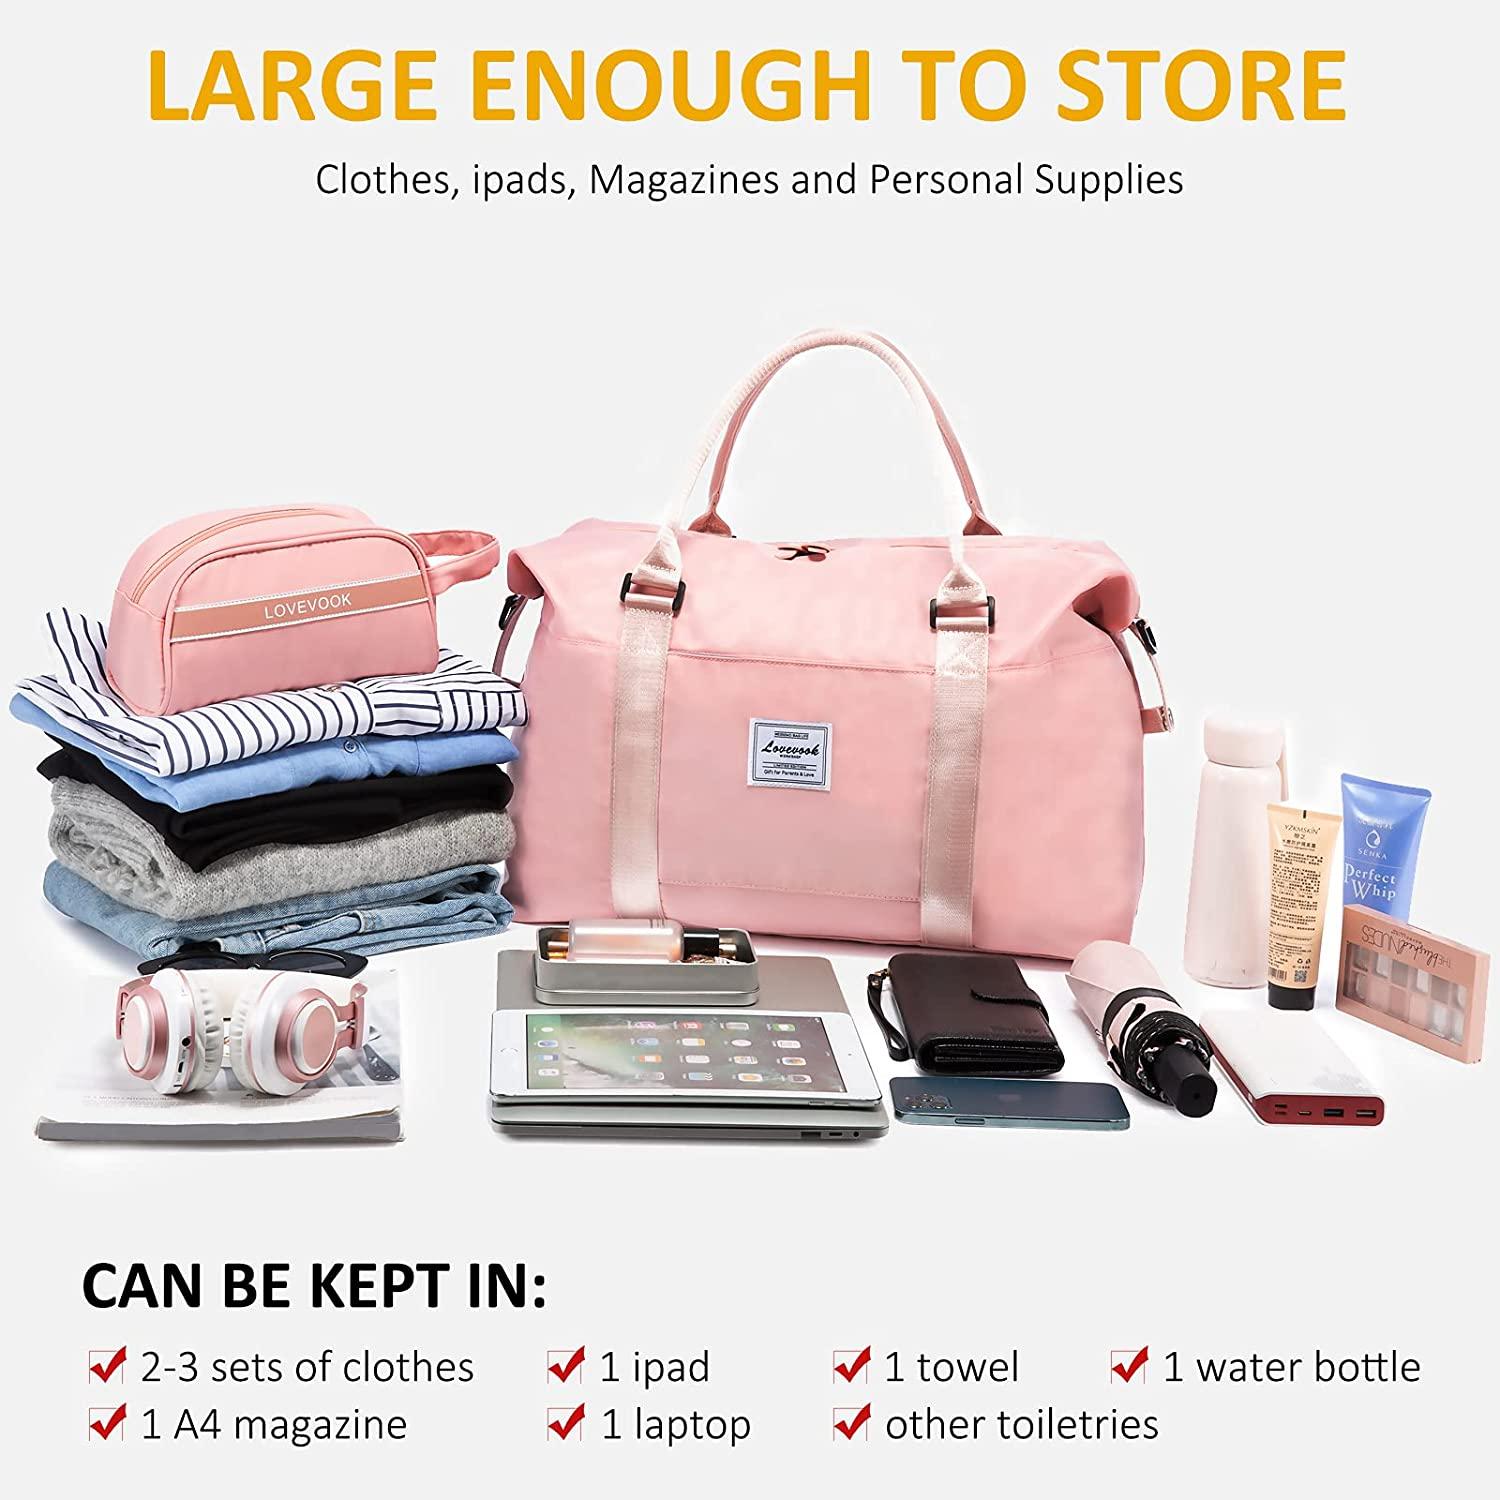 Livhil Weekender Bag for Women Sports Tote Gym Bag, Hospital Bag for Labor  and Delivery Overnight Bags for Women, Travel Duffle Bags with Toiletry Bag